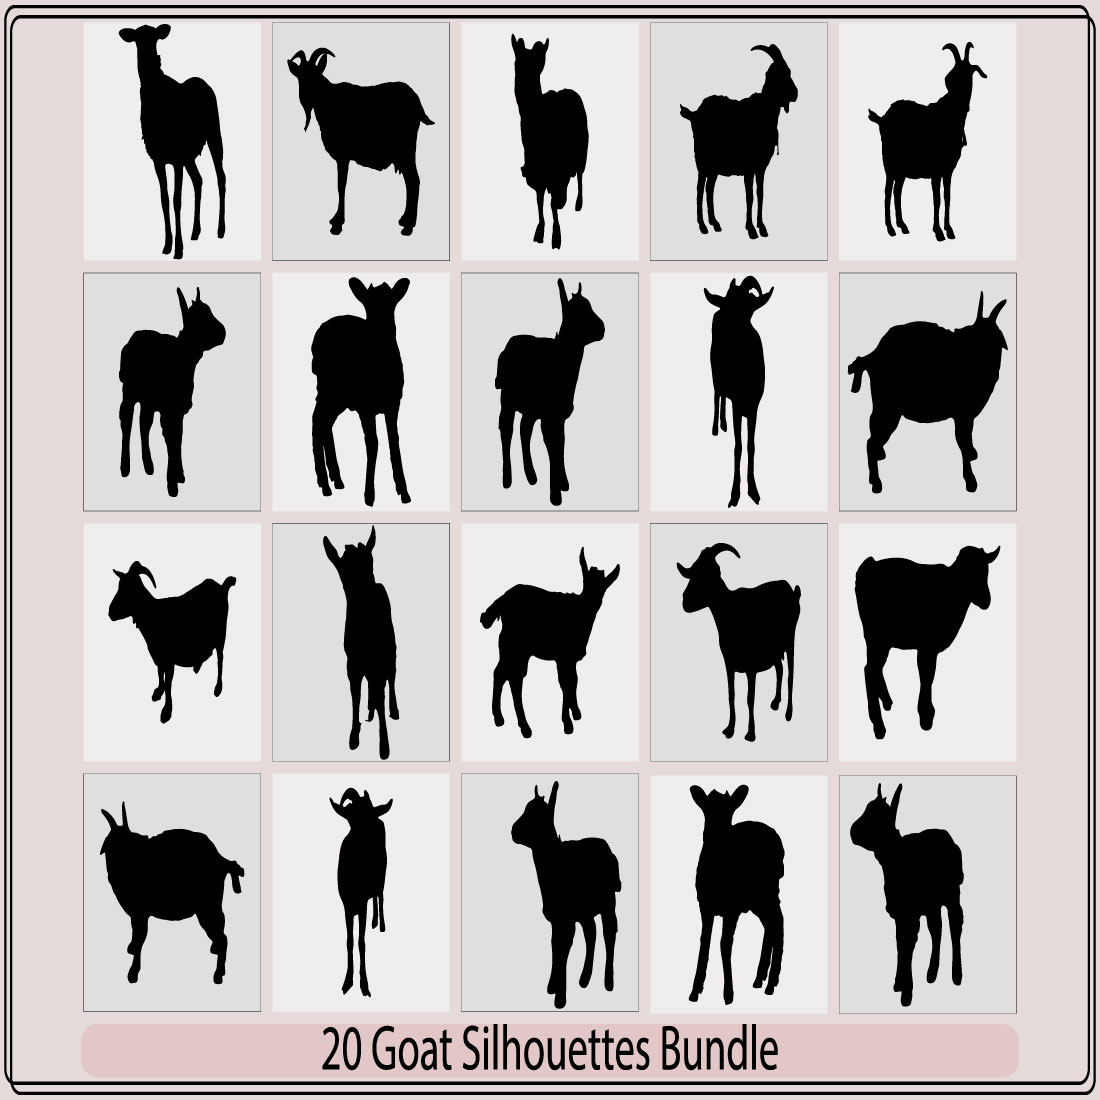 Goat Silhouette,goat animal farm icon,Goats isolated on white, hand drawn vector illustration,Goat vector silhouette Farm animal silhouette preview image.